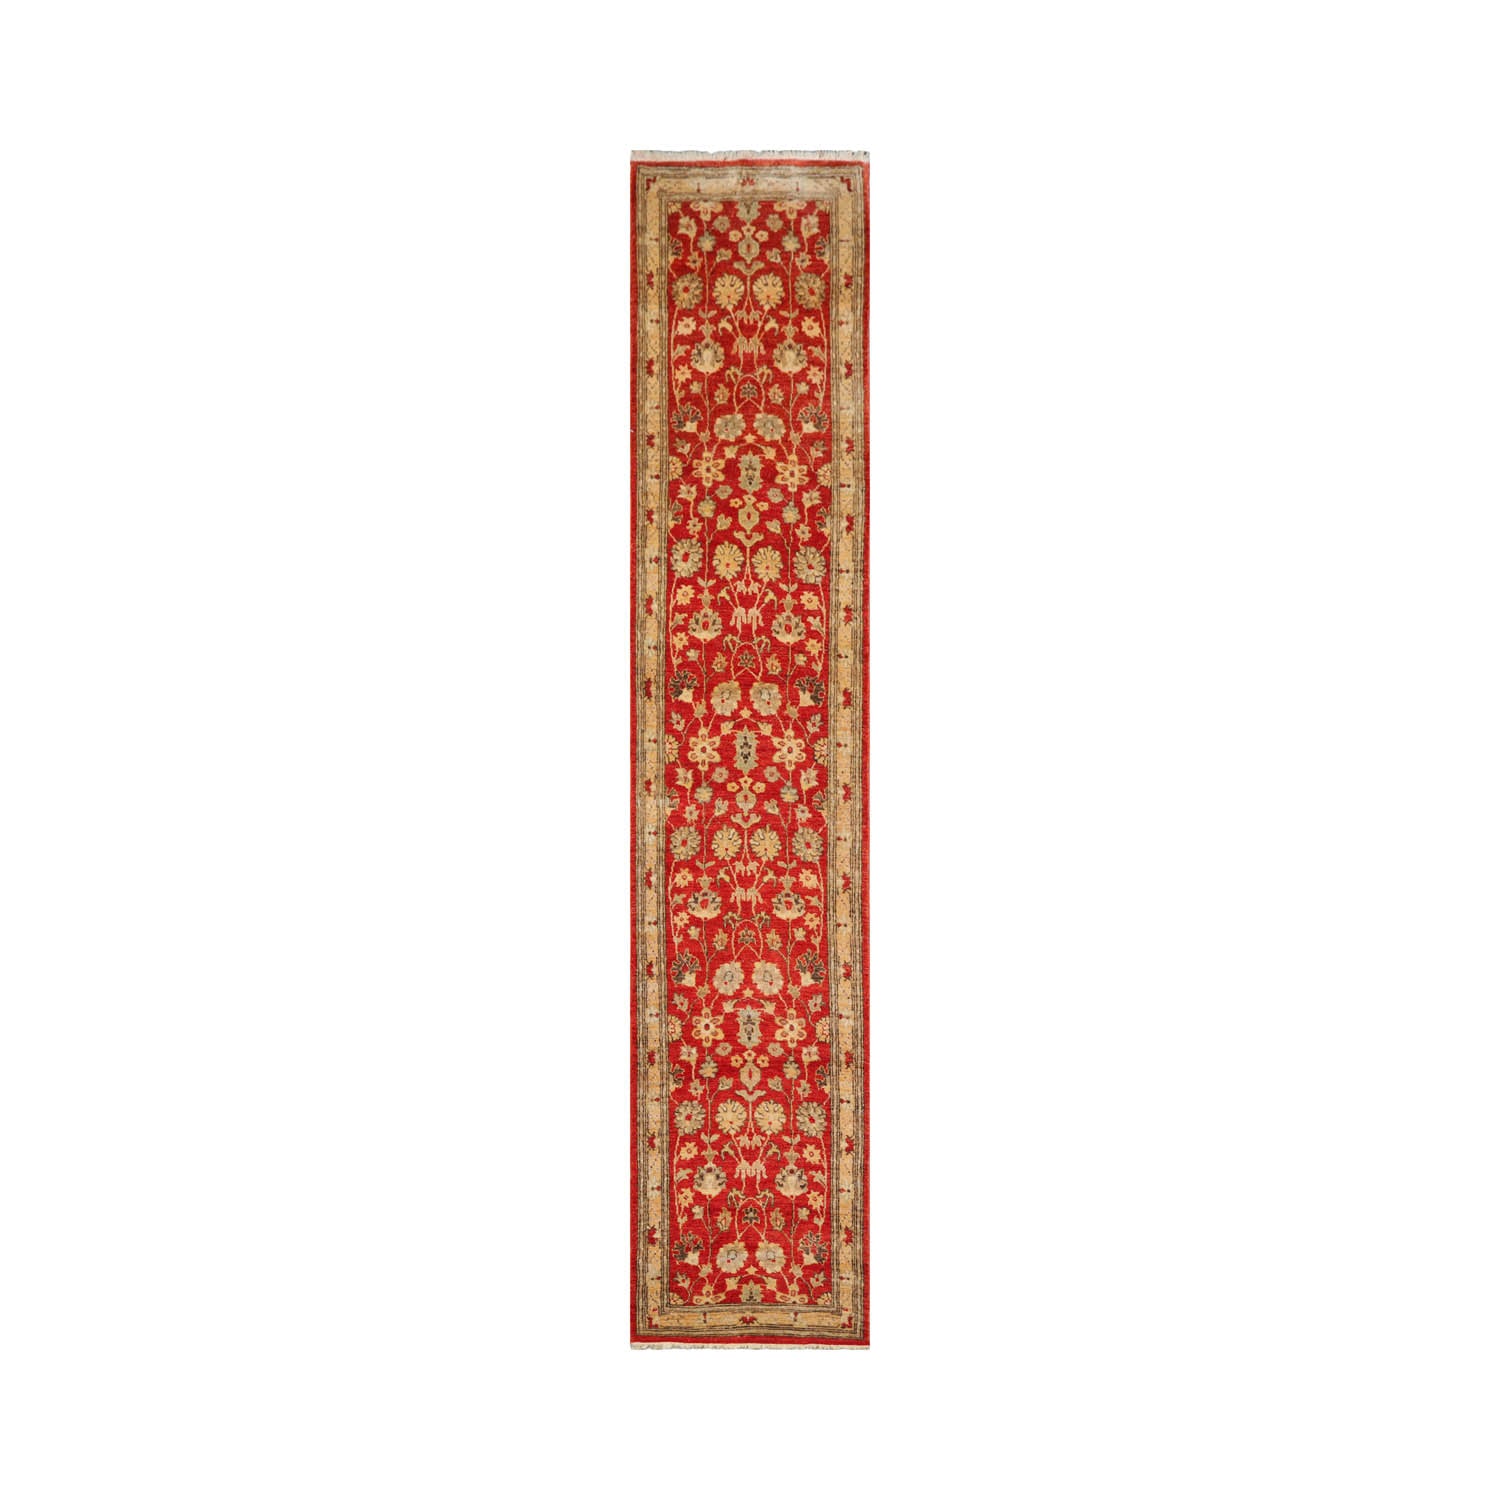 Russia Runner Hand Knotted 100% Wool Chobi Peshawar Traditional Oriental Area Rug Red, Beige Color